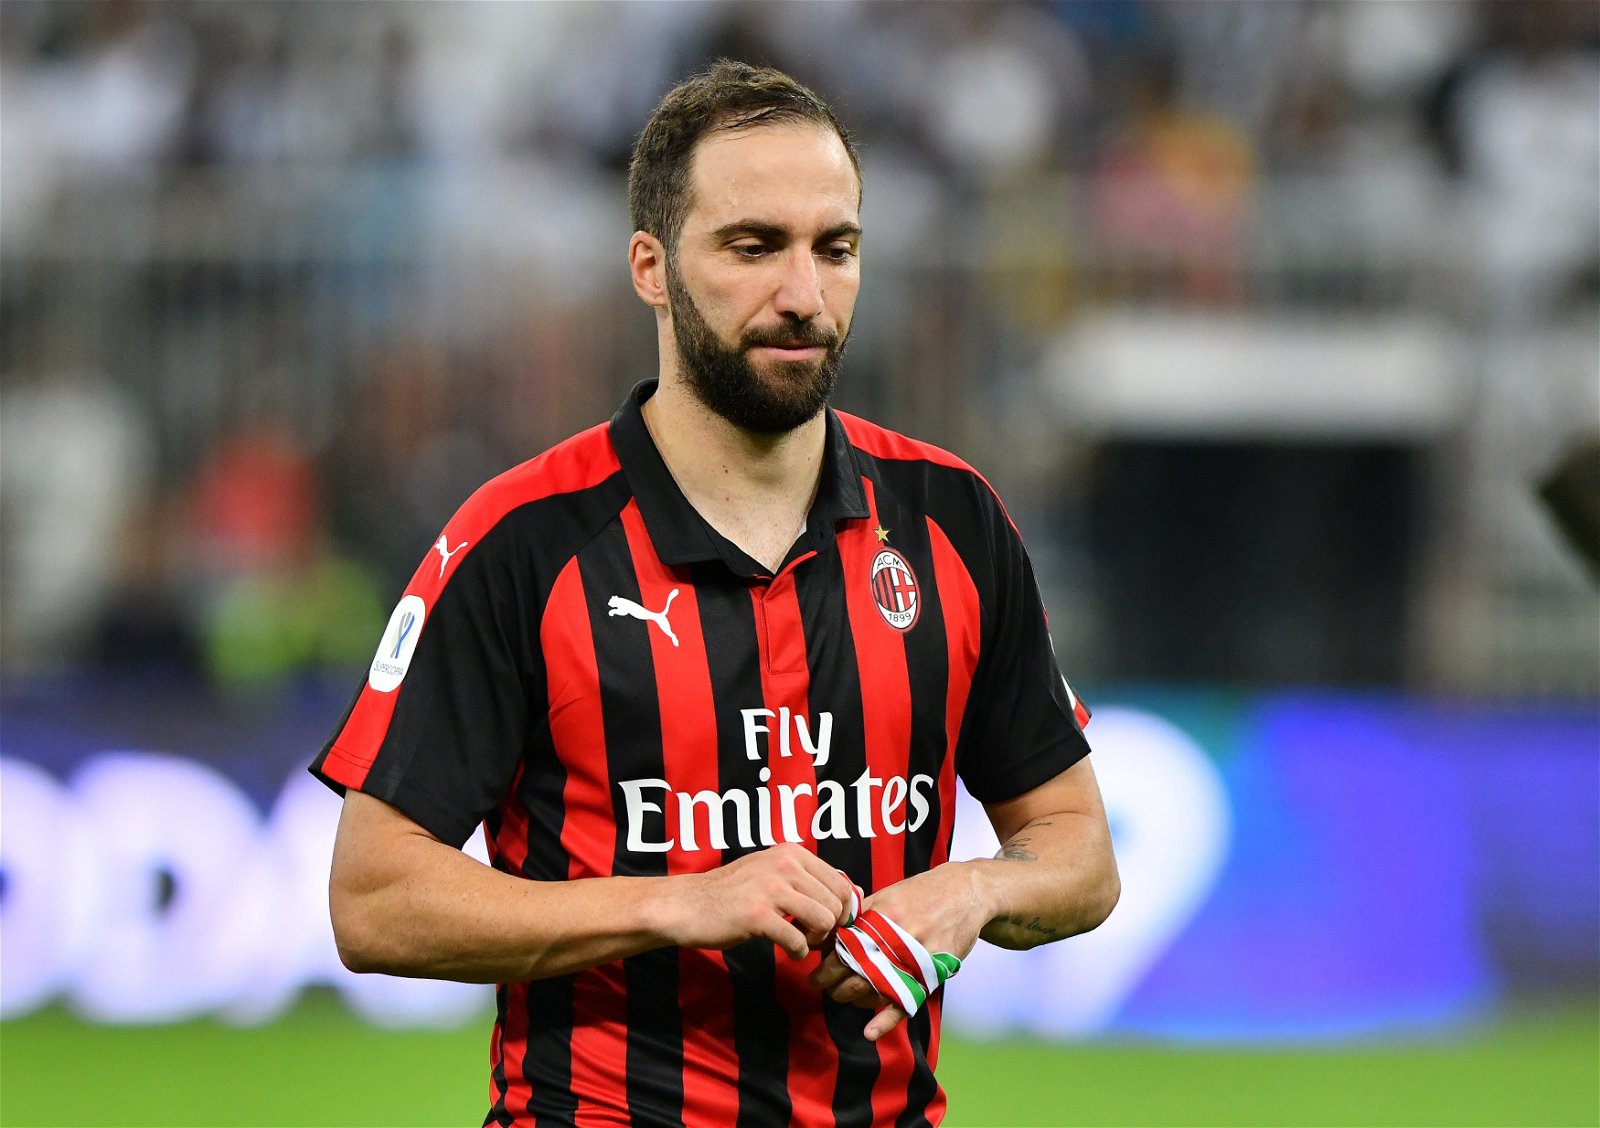 Moody Higuain is a risky signing